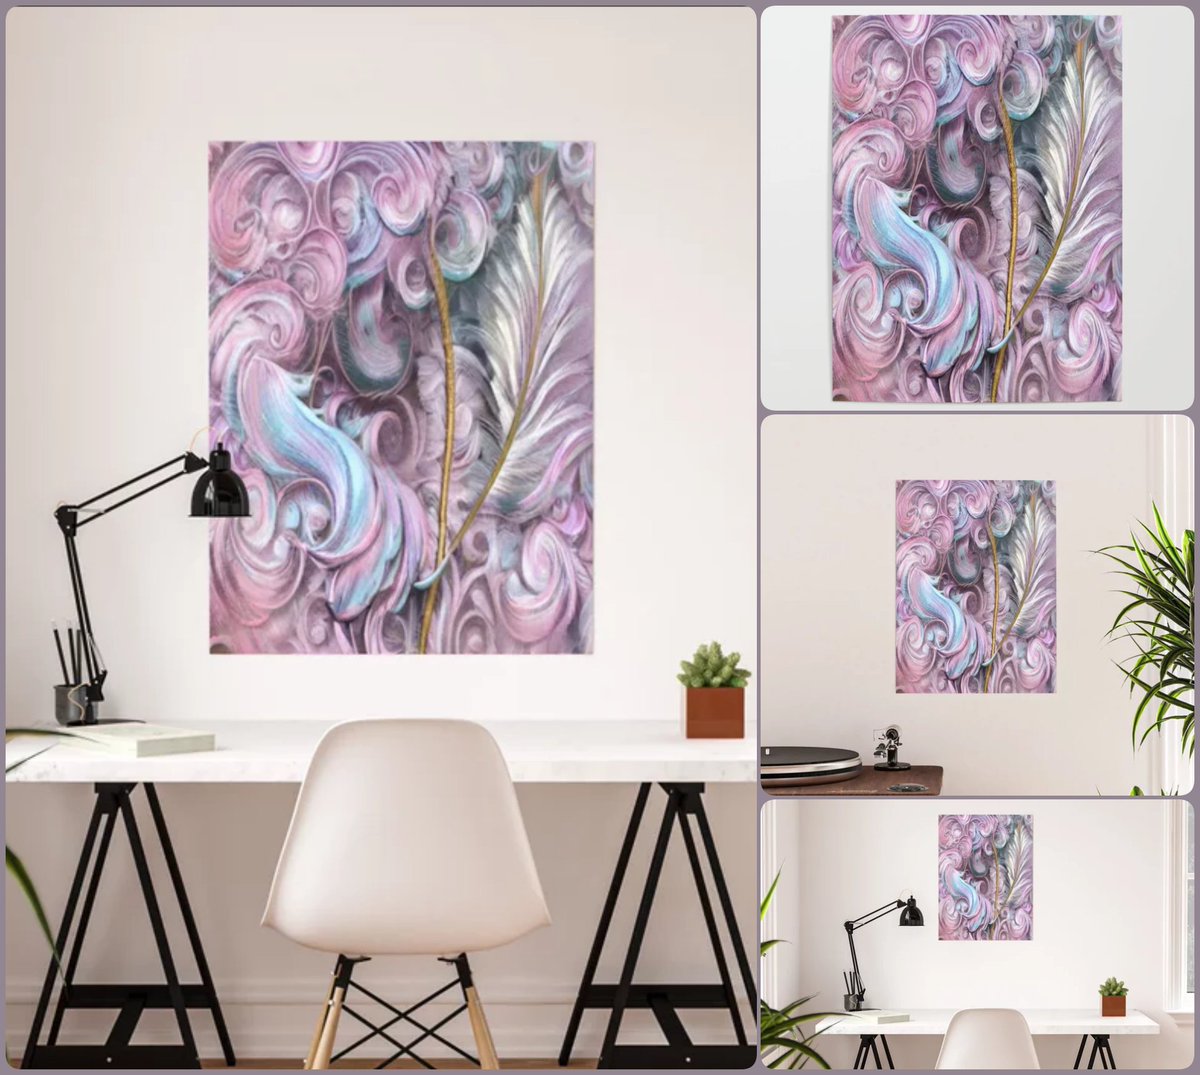 Chalchiuhtlicue Poster~The Art of Uniqueness!~ #artfalaxy #art #tapestries #homedecor #society6 #wallart #designs #trendy #modern #swirls #accents #accessories #posters #teal #blue #pink #purple society6.com/product/chalch…